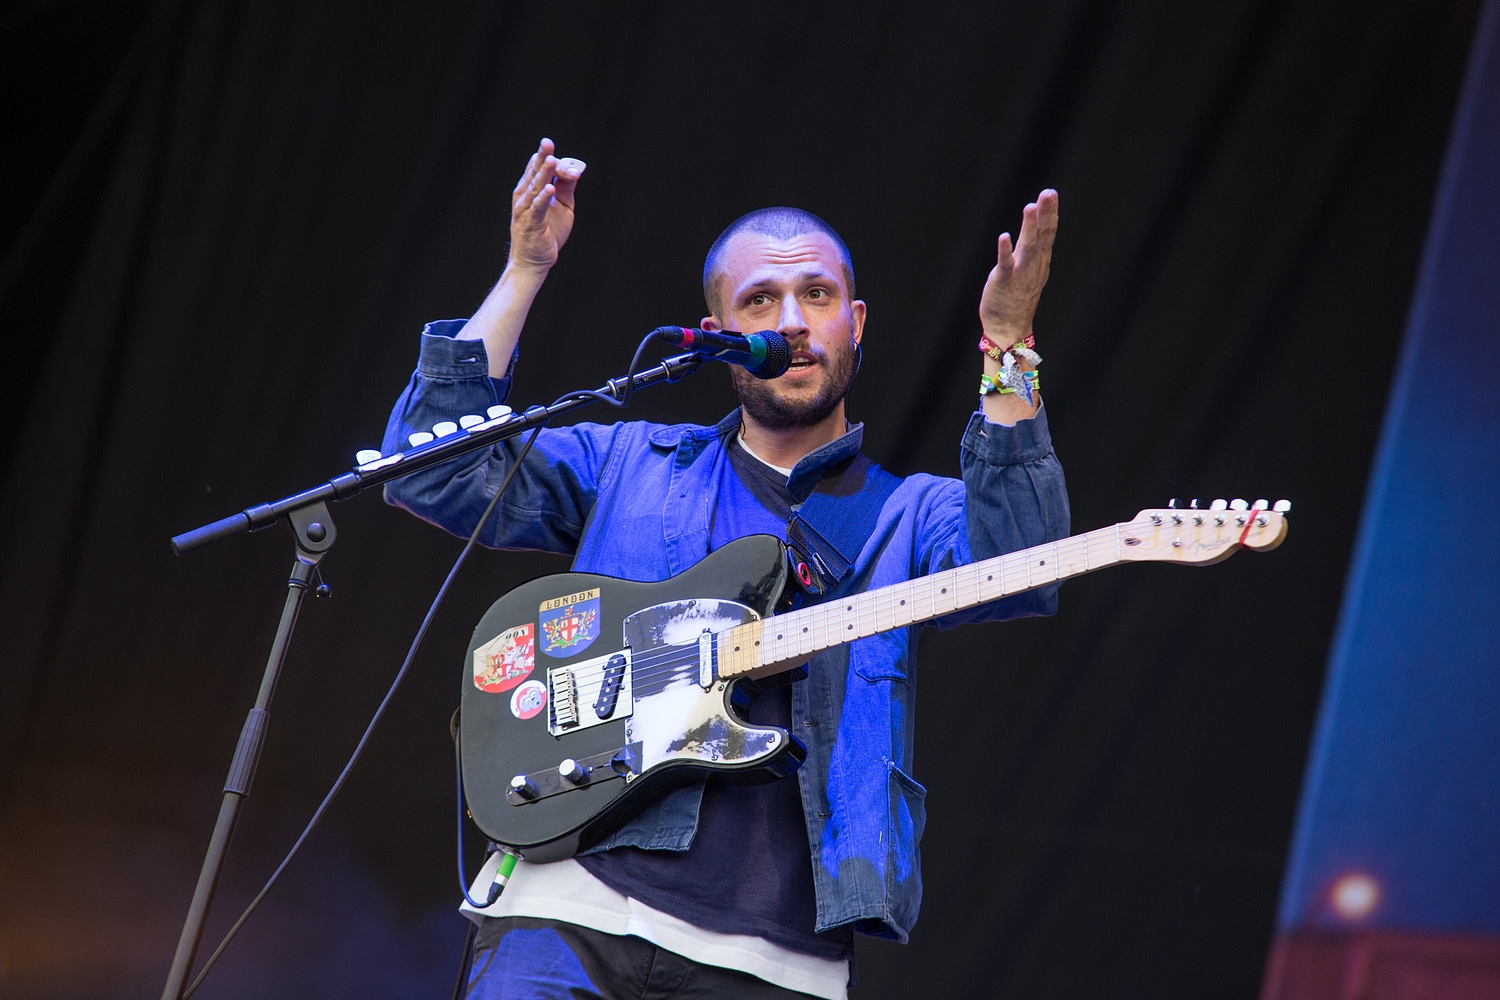 The Maccabees return with new material and Jamie T at Glastonbury 2015